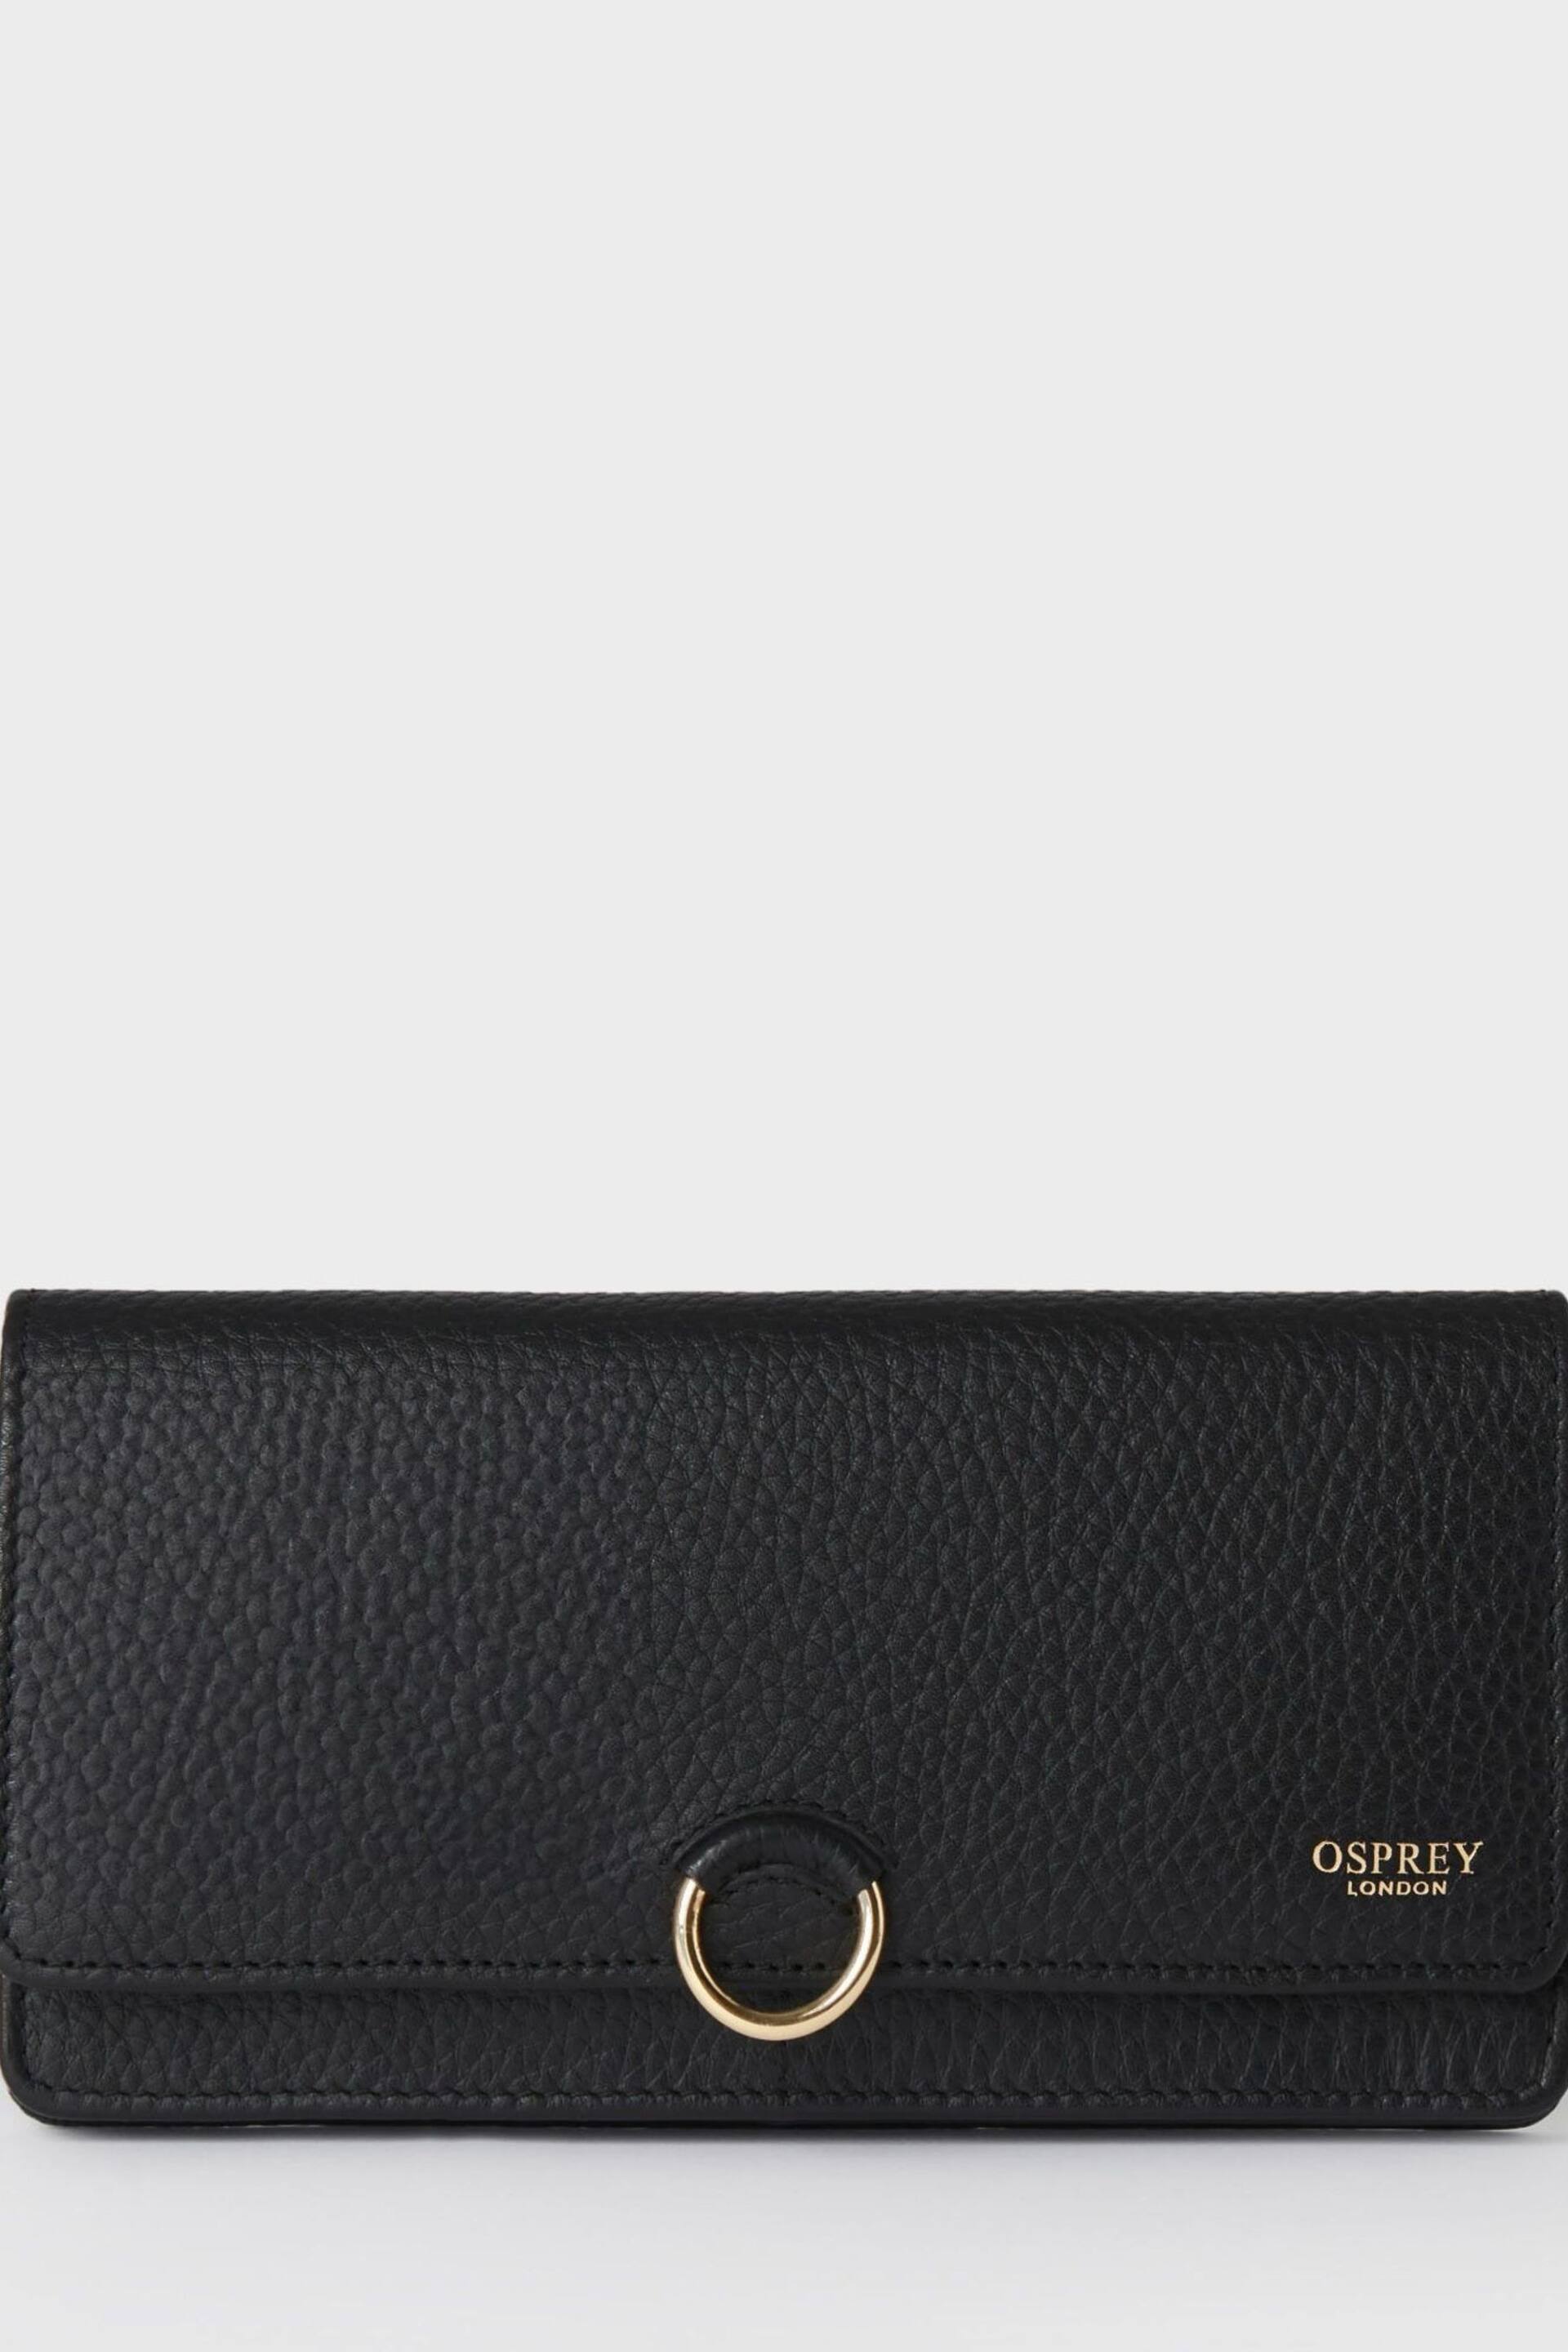 OSPREY LONDON The Harper Matinee Leather Purse - Image 1 of 5